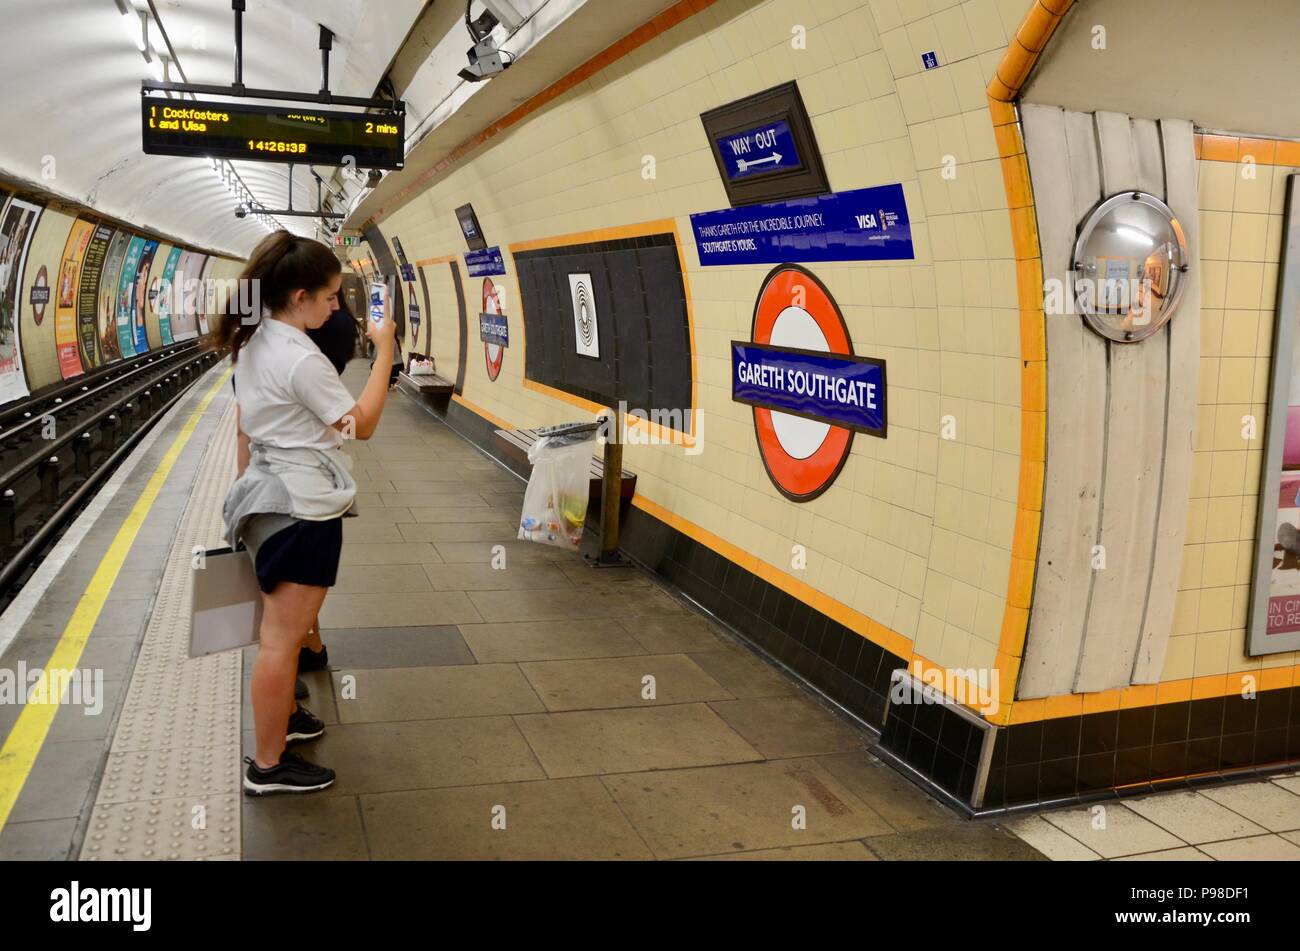 London, UK. 15th July 2018. southgate underground station on the london piccadilly line re-named gareth southgate station july 16th 2018 for 48 hours by transport for london Credit: simon leigh/Alamy Live News Stock Photo